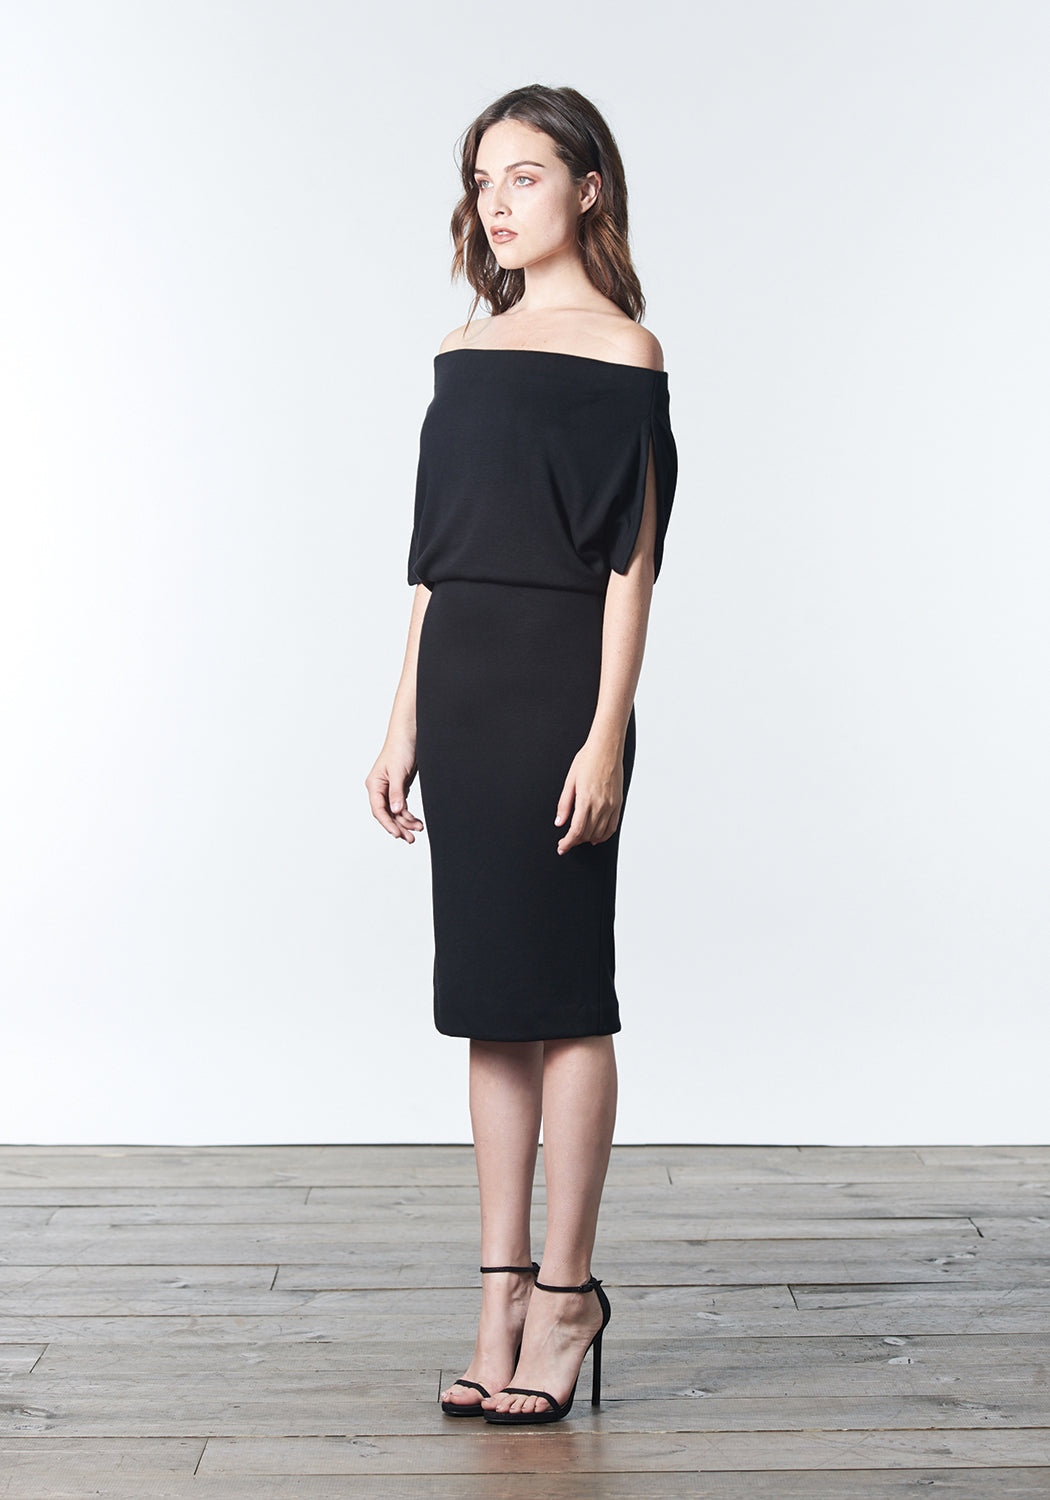 Fall, Autumn, Winter cocktail or work knit "little black dress". Made of stretch tencel.